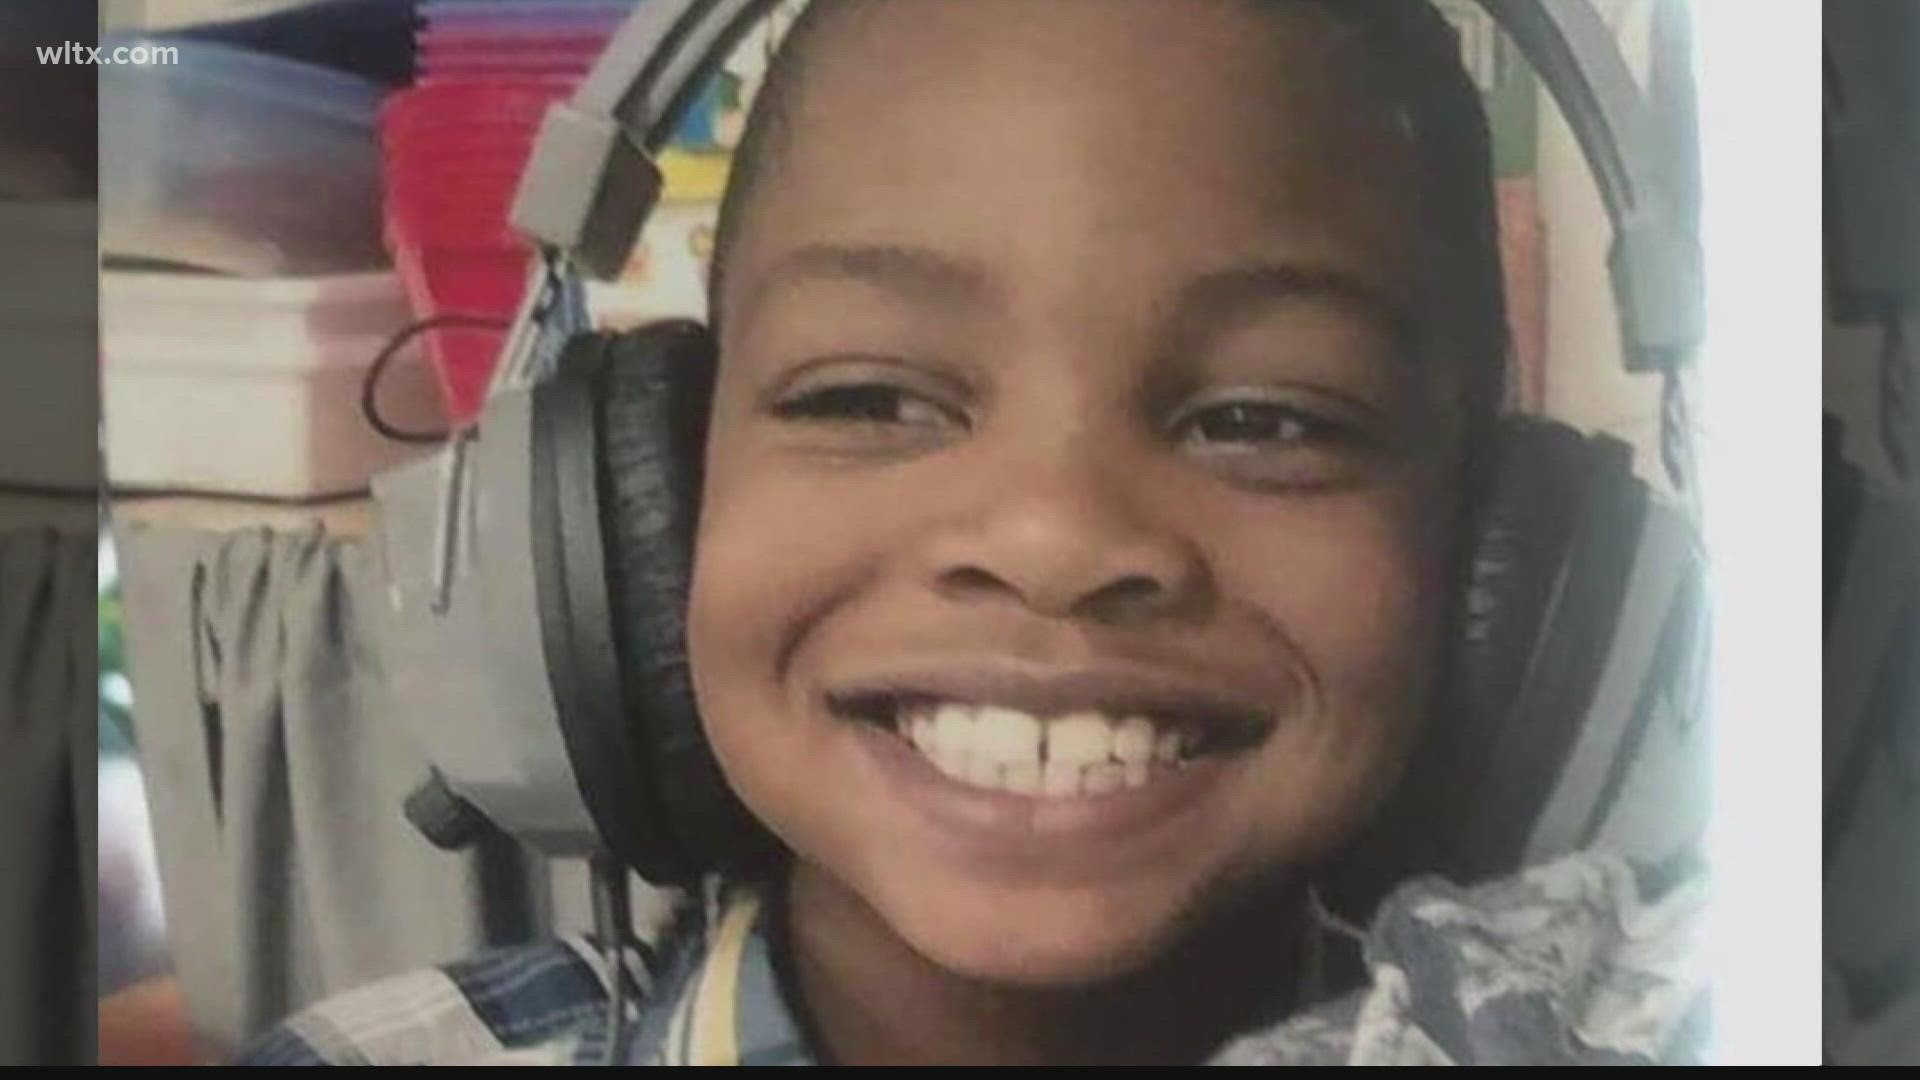 Two years after a 7-year-old was shot in the head, his killer has been found guilty of murder and sentenced to decades in prison.